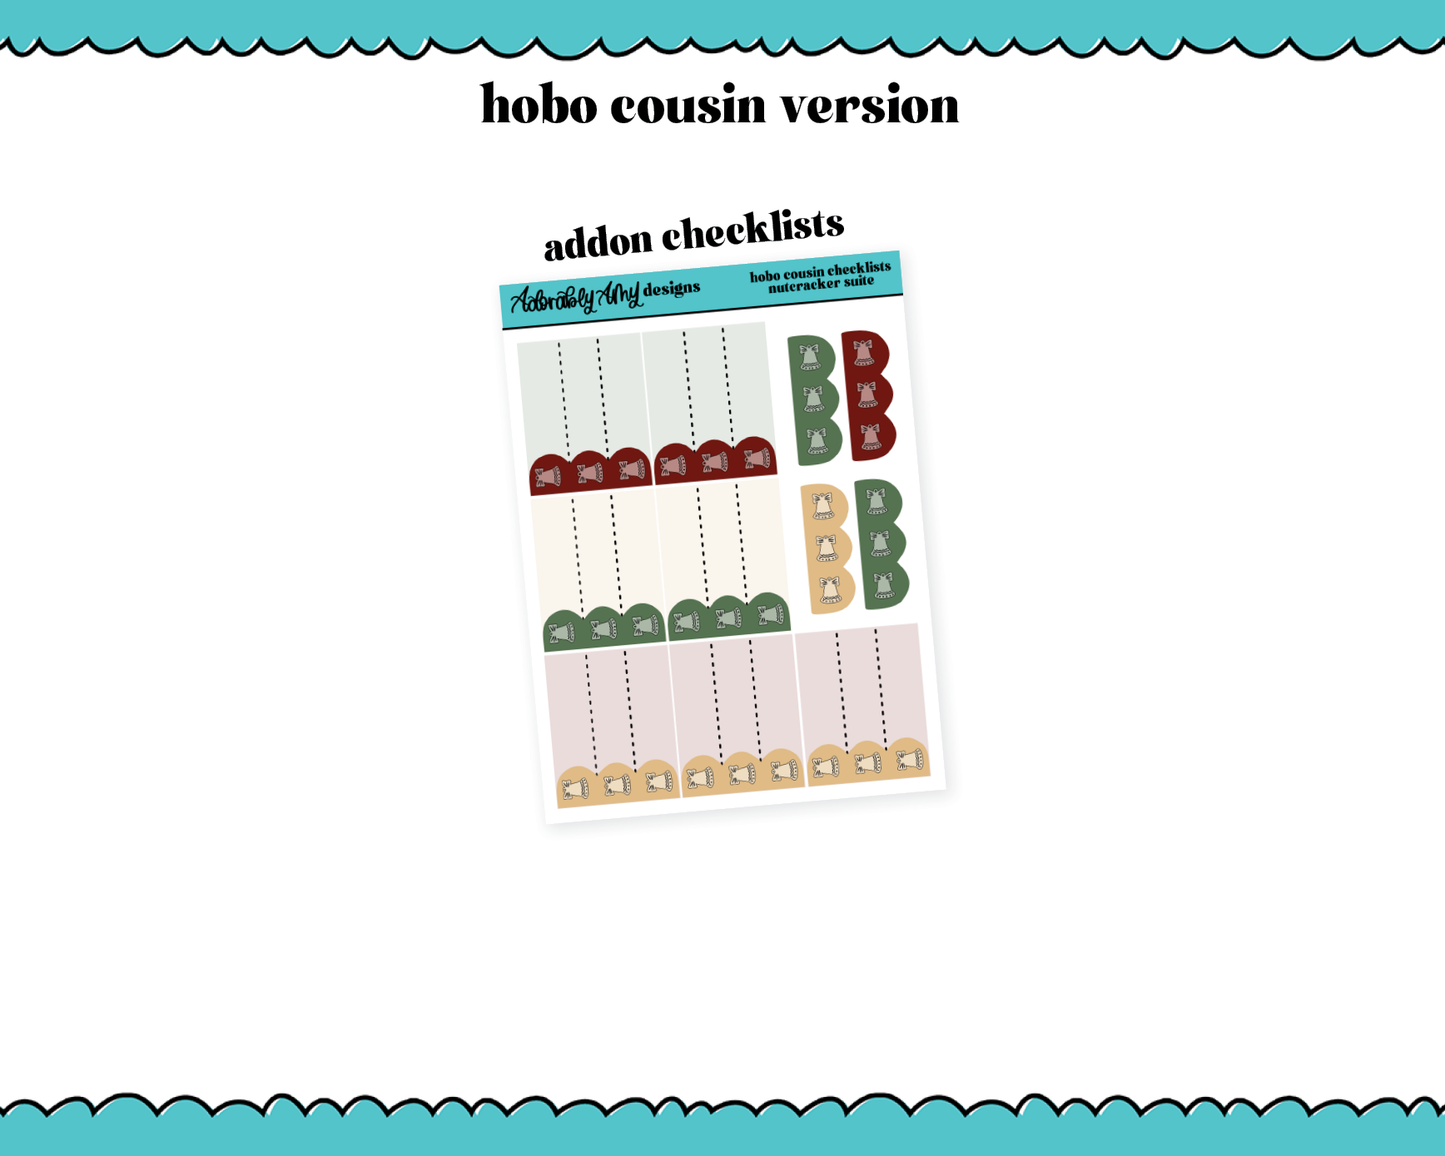 Hobonichi Cousin Weekly Nutcracker Suite Christmas Themed Planner Sticker Kit for Hobo Cousin or Similar Planners